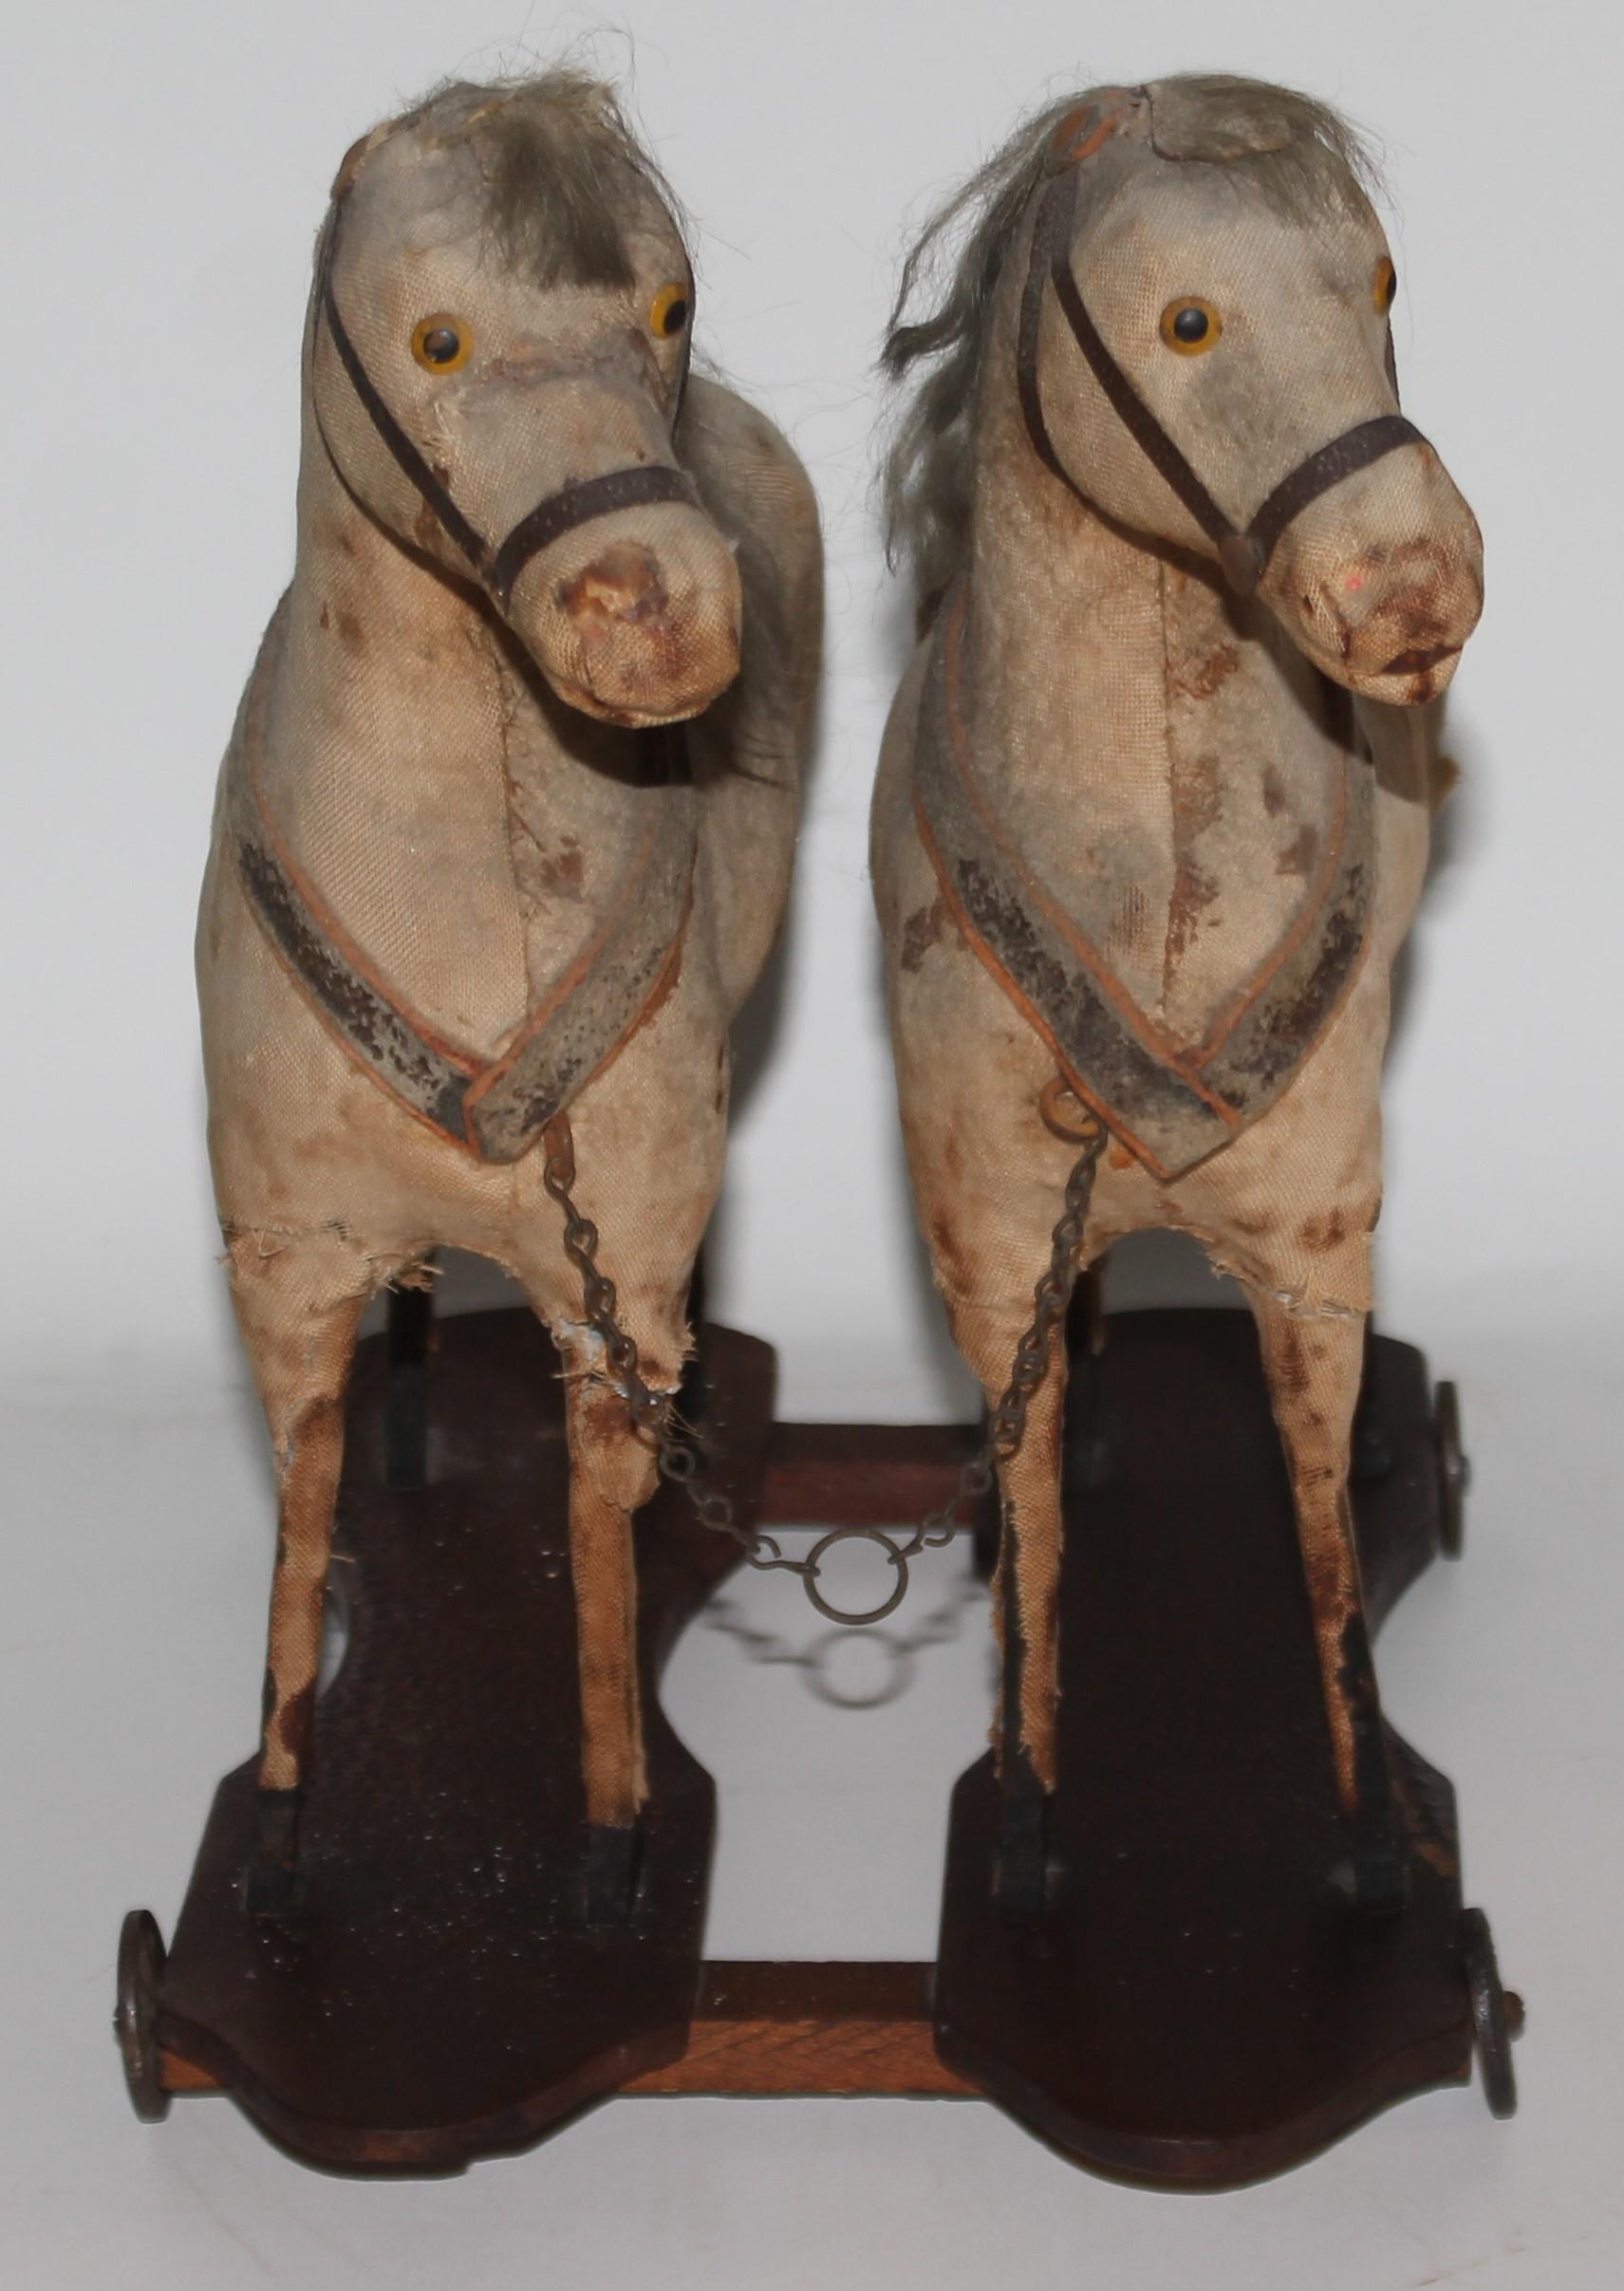 19Thc all original double horse pull toy with original iron wheels and red painted wood base. The condition is worn but in good condition.